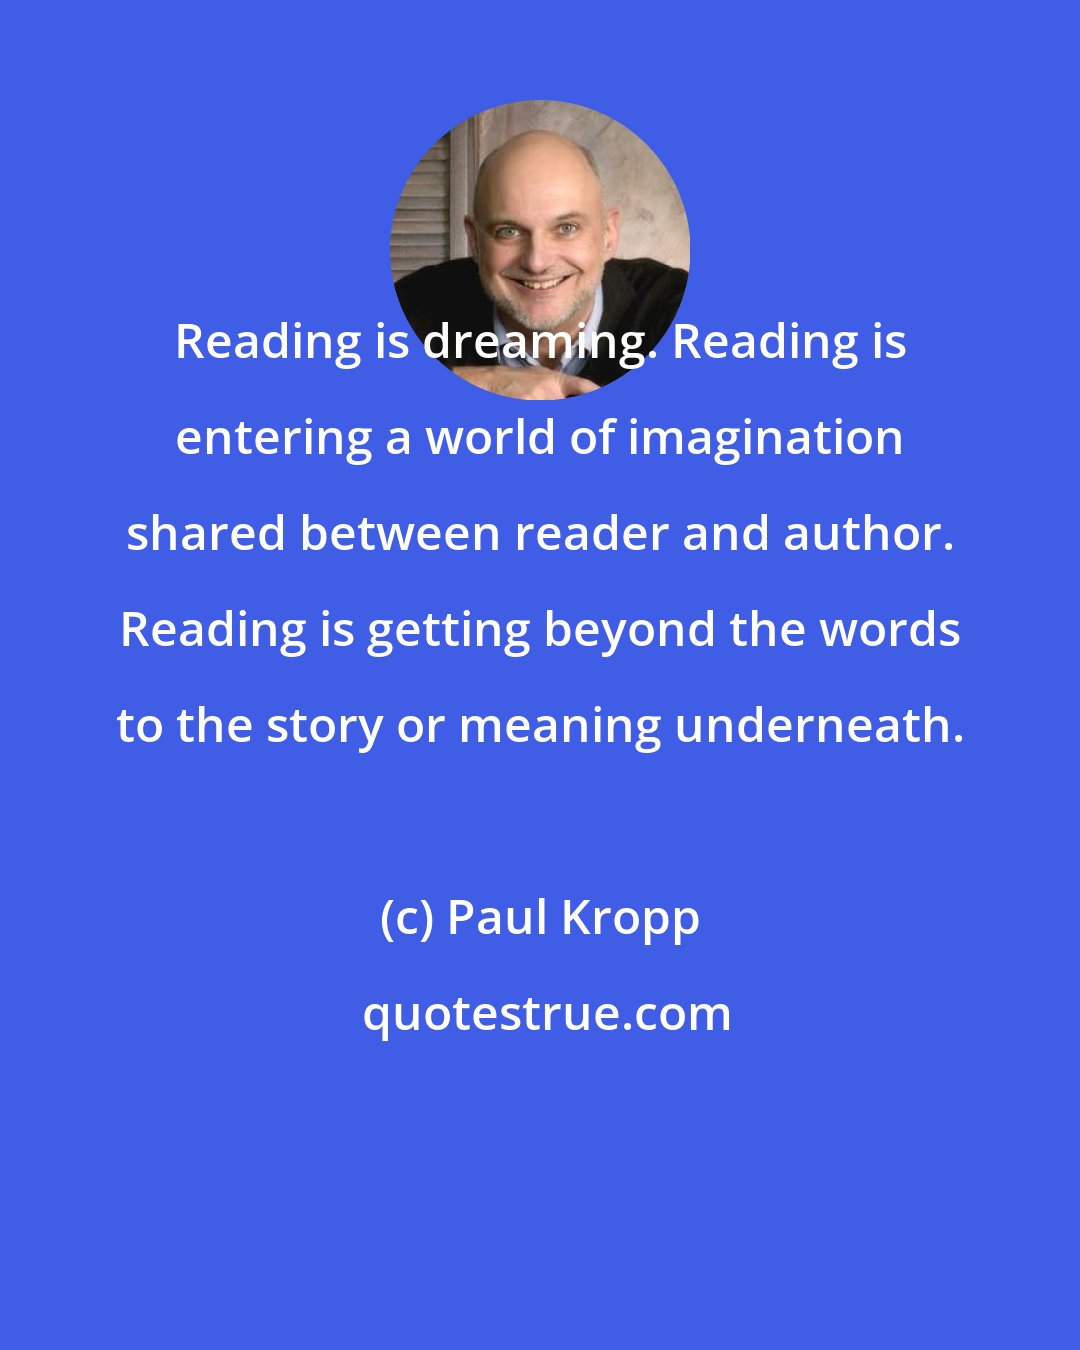 Paul Kropp: Reading is dreaming. Reading is entering a world of imagination shared between reader and author. Reading is getting beyond the words to the story or meaning underneath.